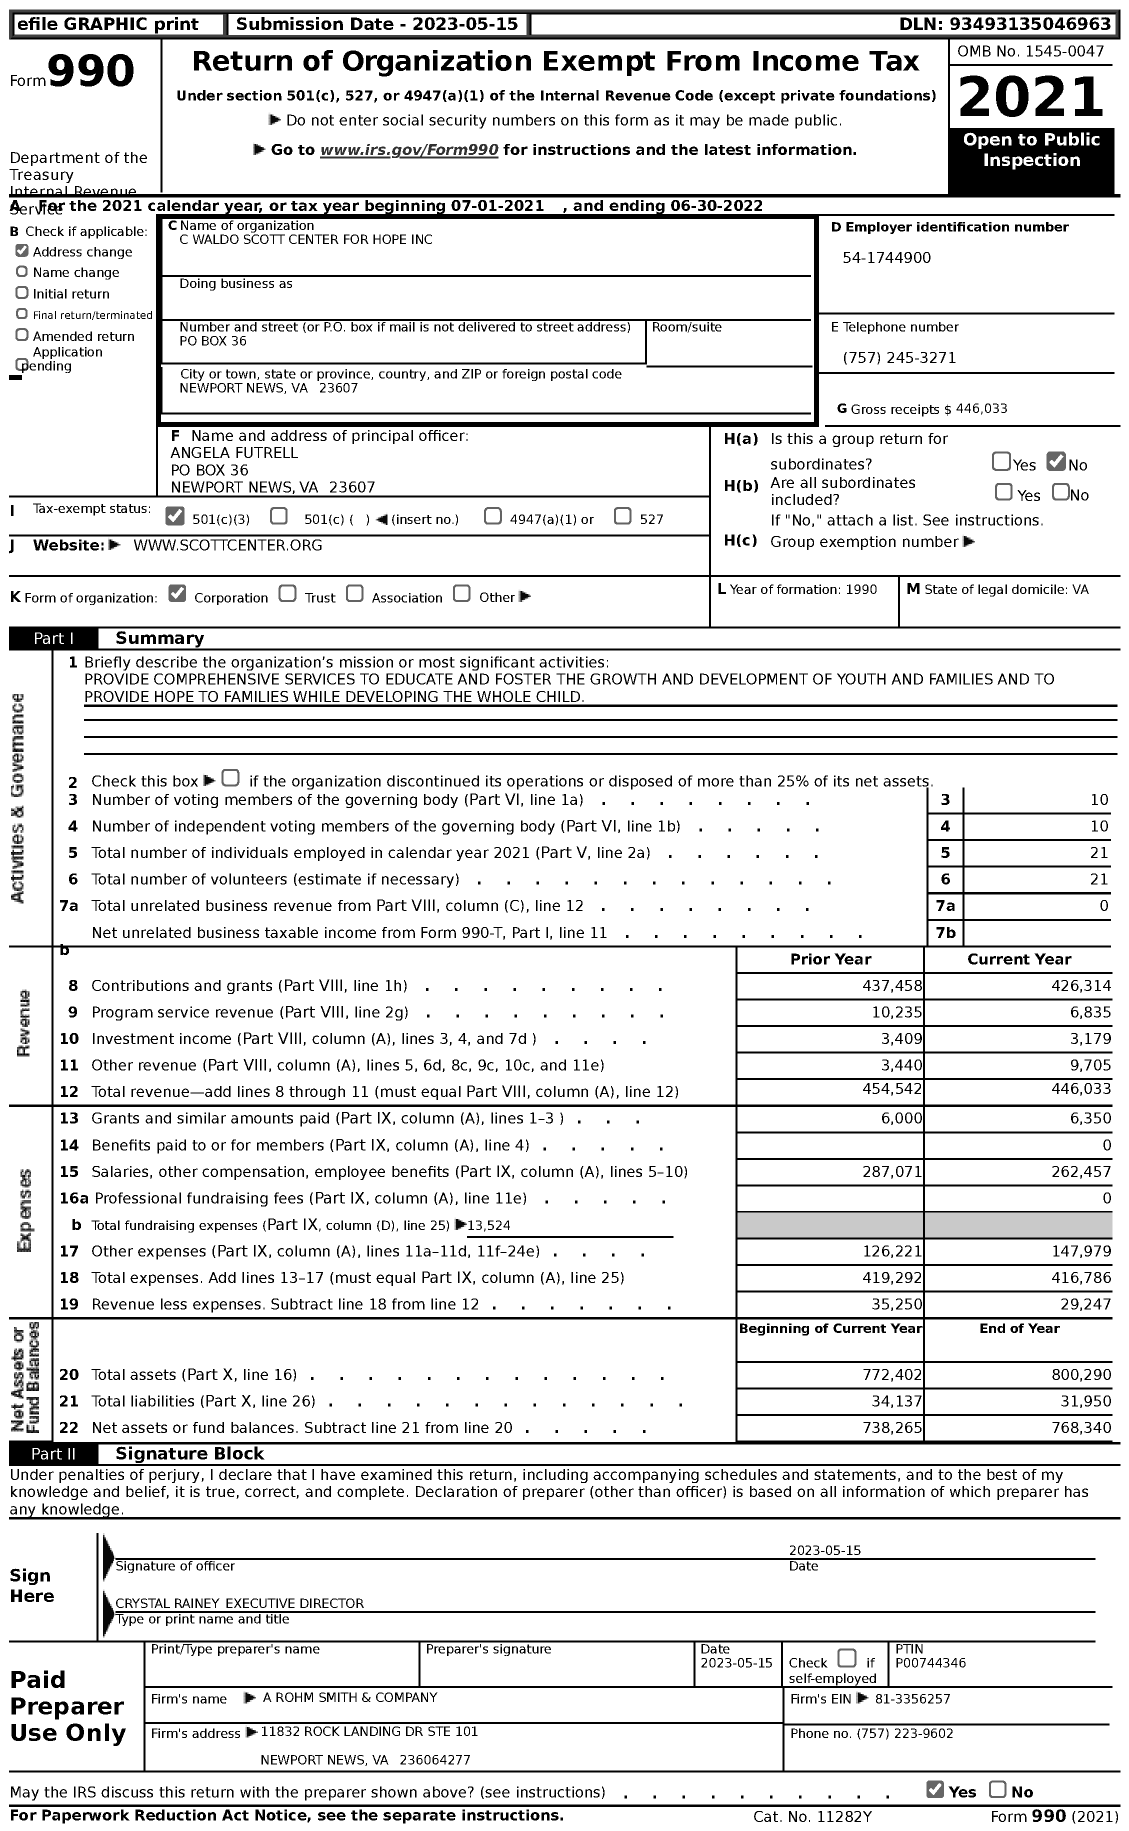 Image of first page of 2021 Form 990 for C Waldo Scott Center for Hope